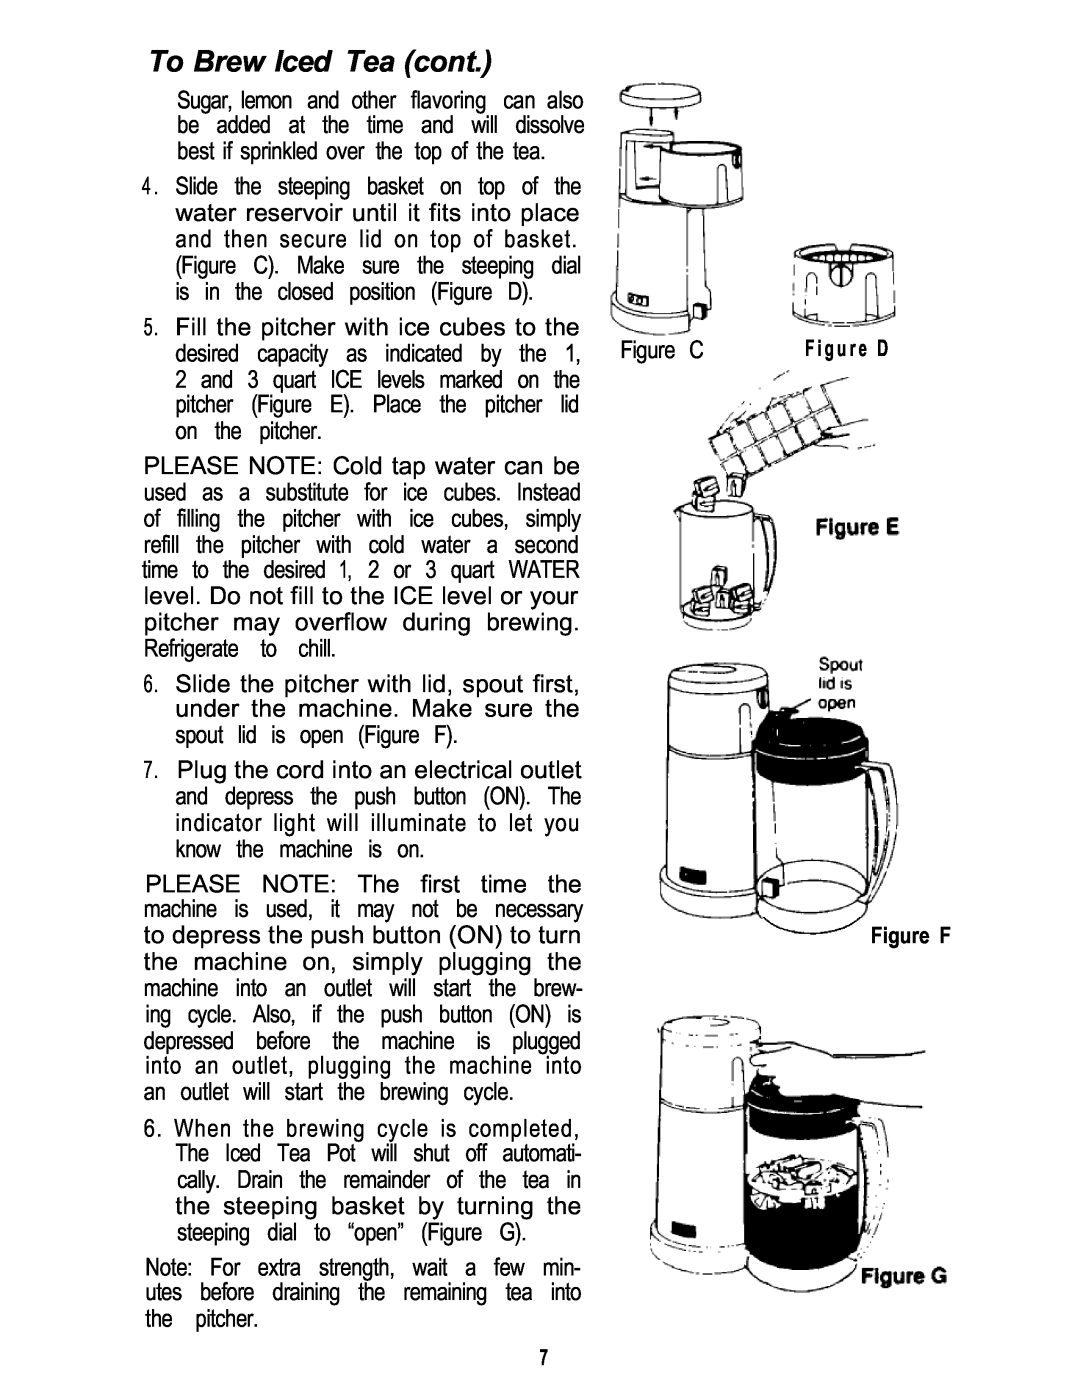 Mr. Coffee TM3 manual To Brew Iced Tea cont 